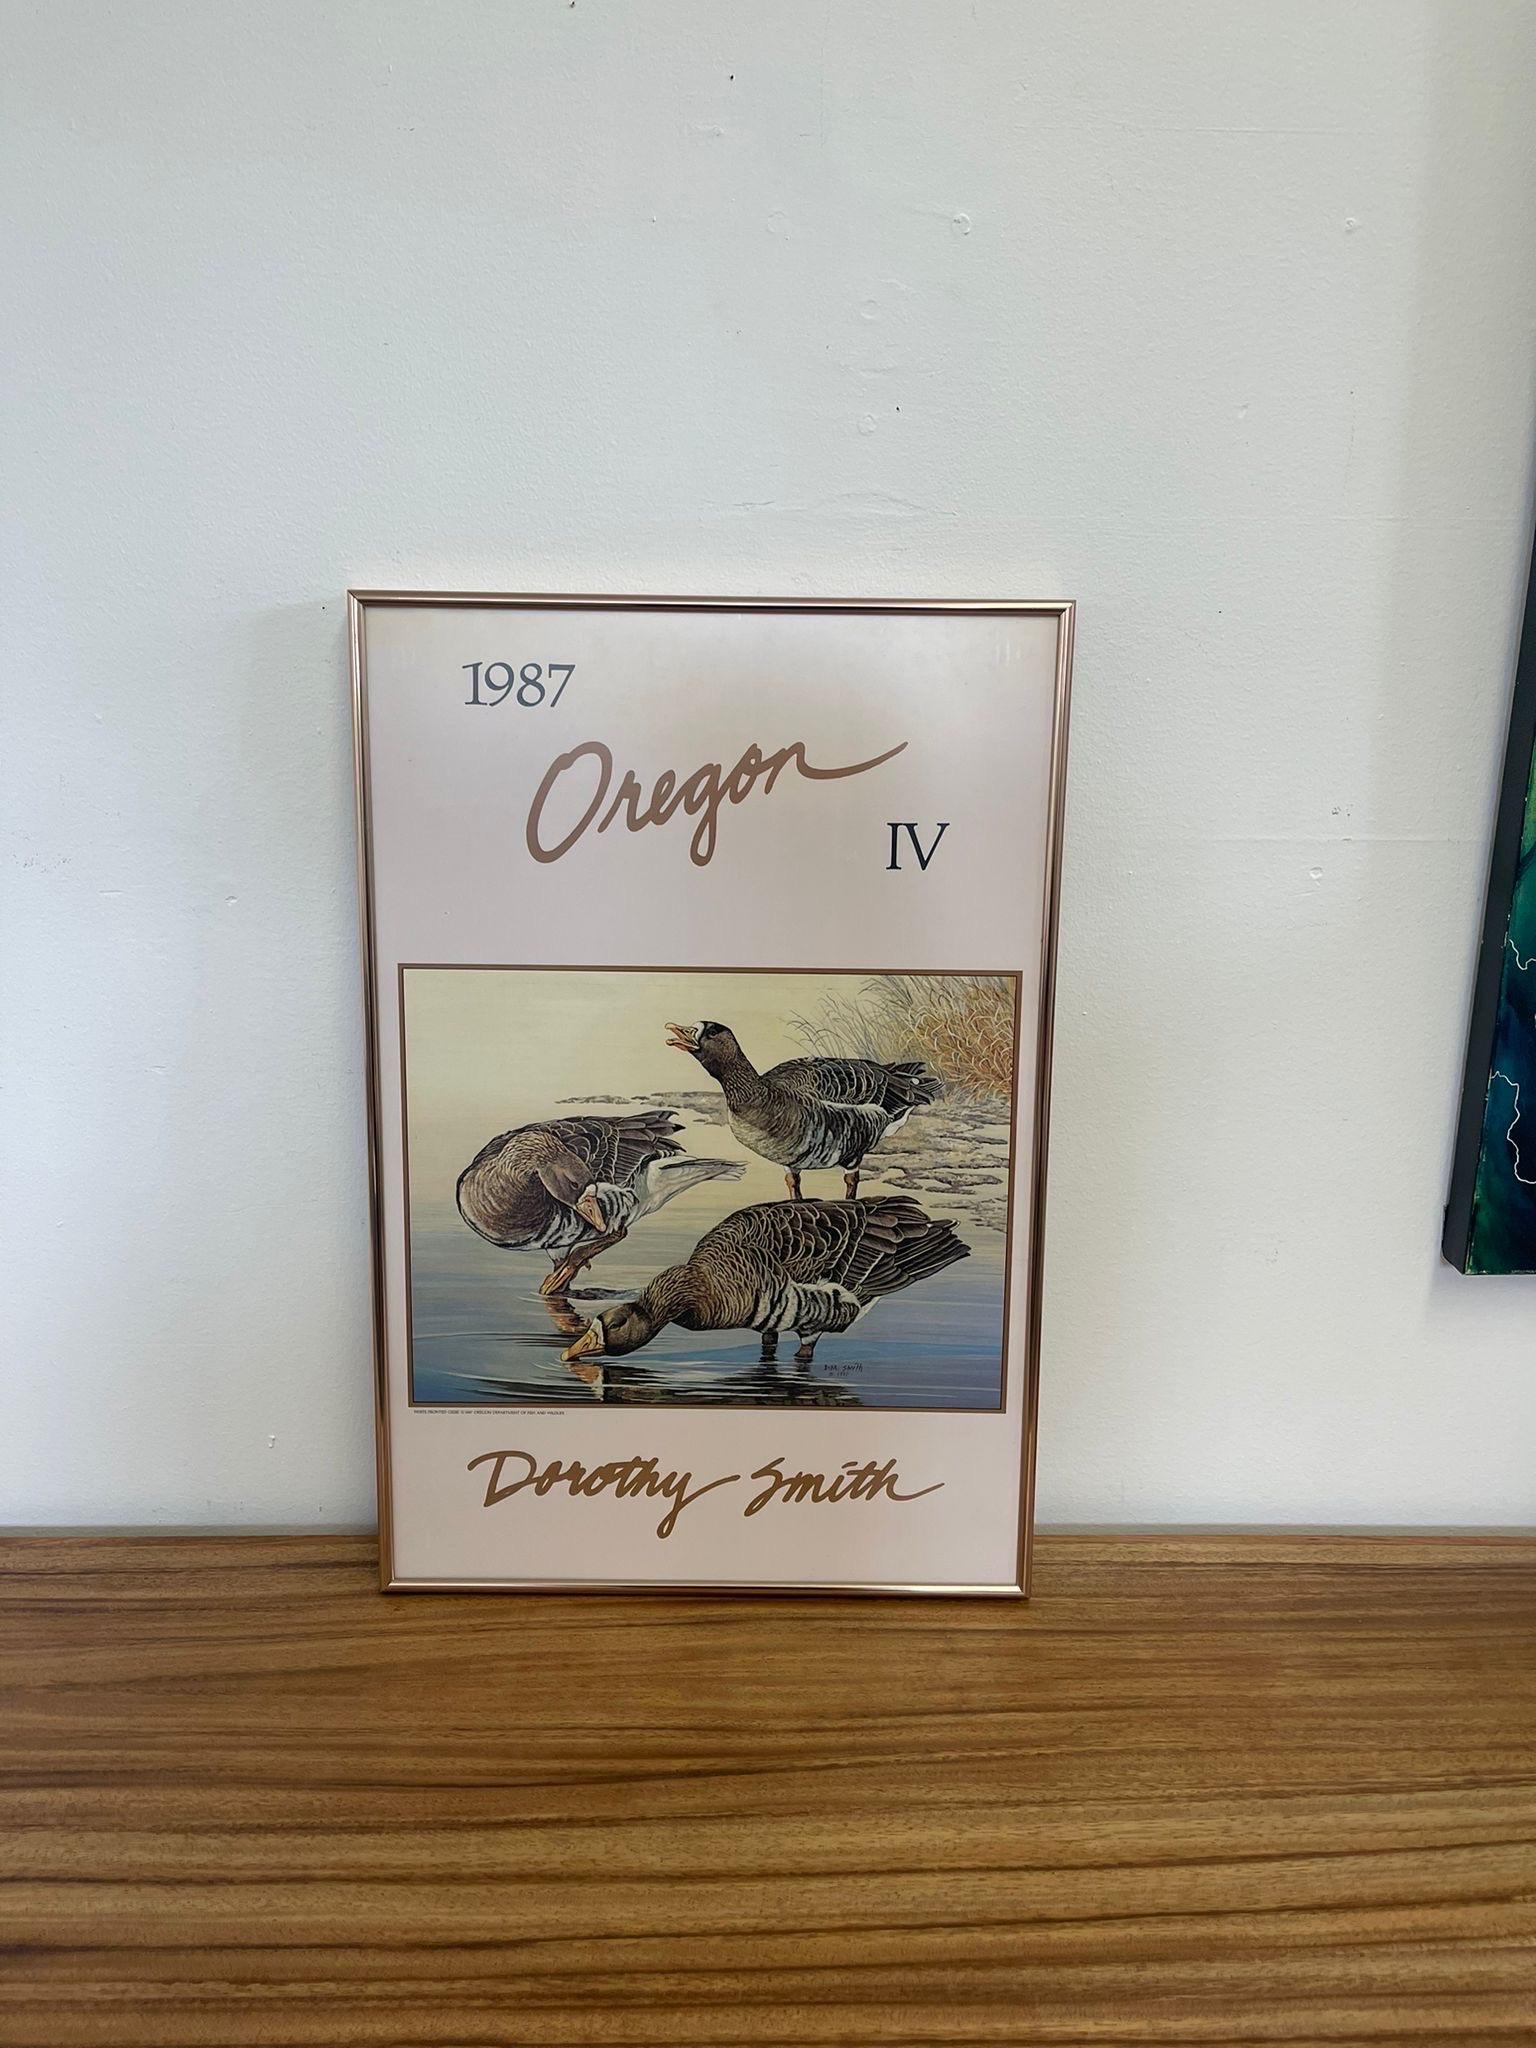 Framed print of Ducks in water. Signature and detailing at the top of the print. Within a copper toned frame. Vintage Condition Consistent with Age as Pictured.

Dimensions. 16 W ; 1/2 D ; 24 H